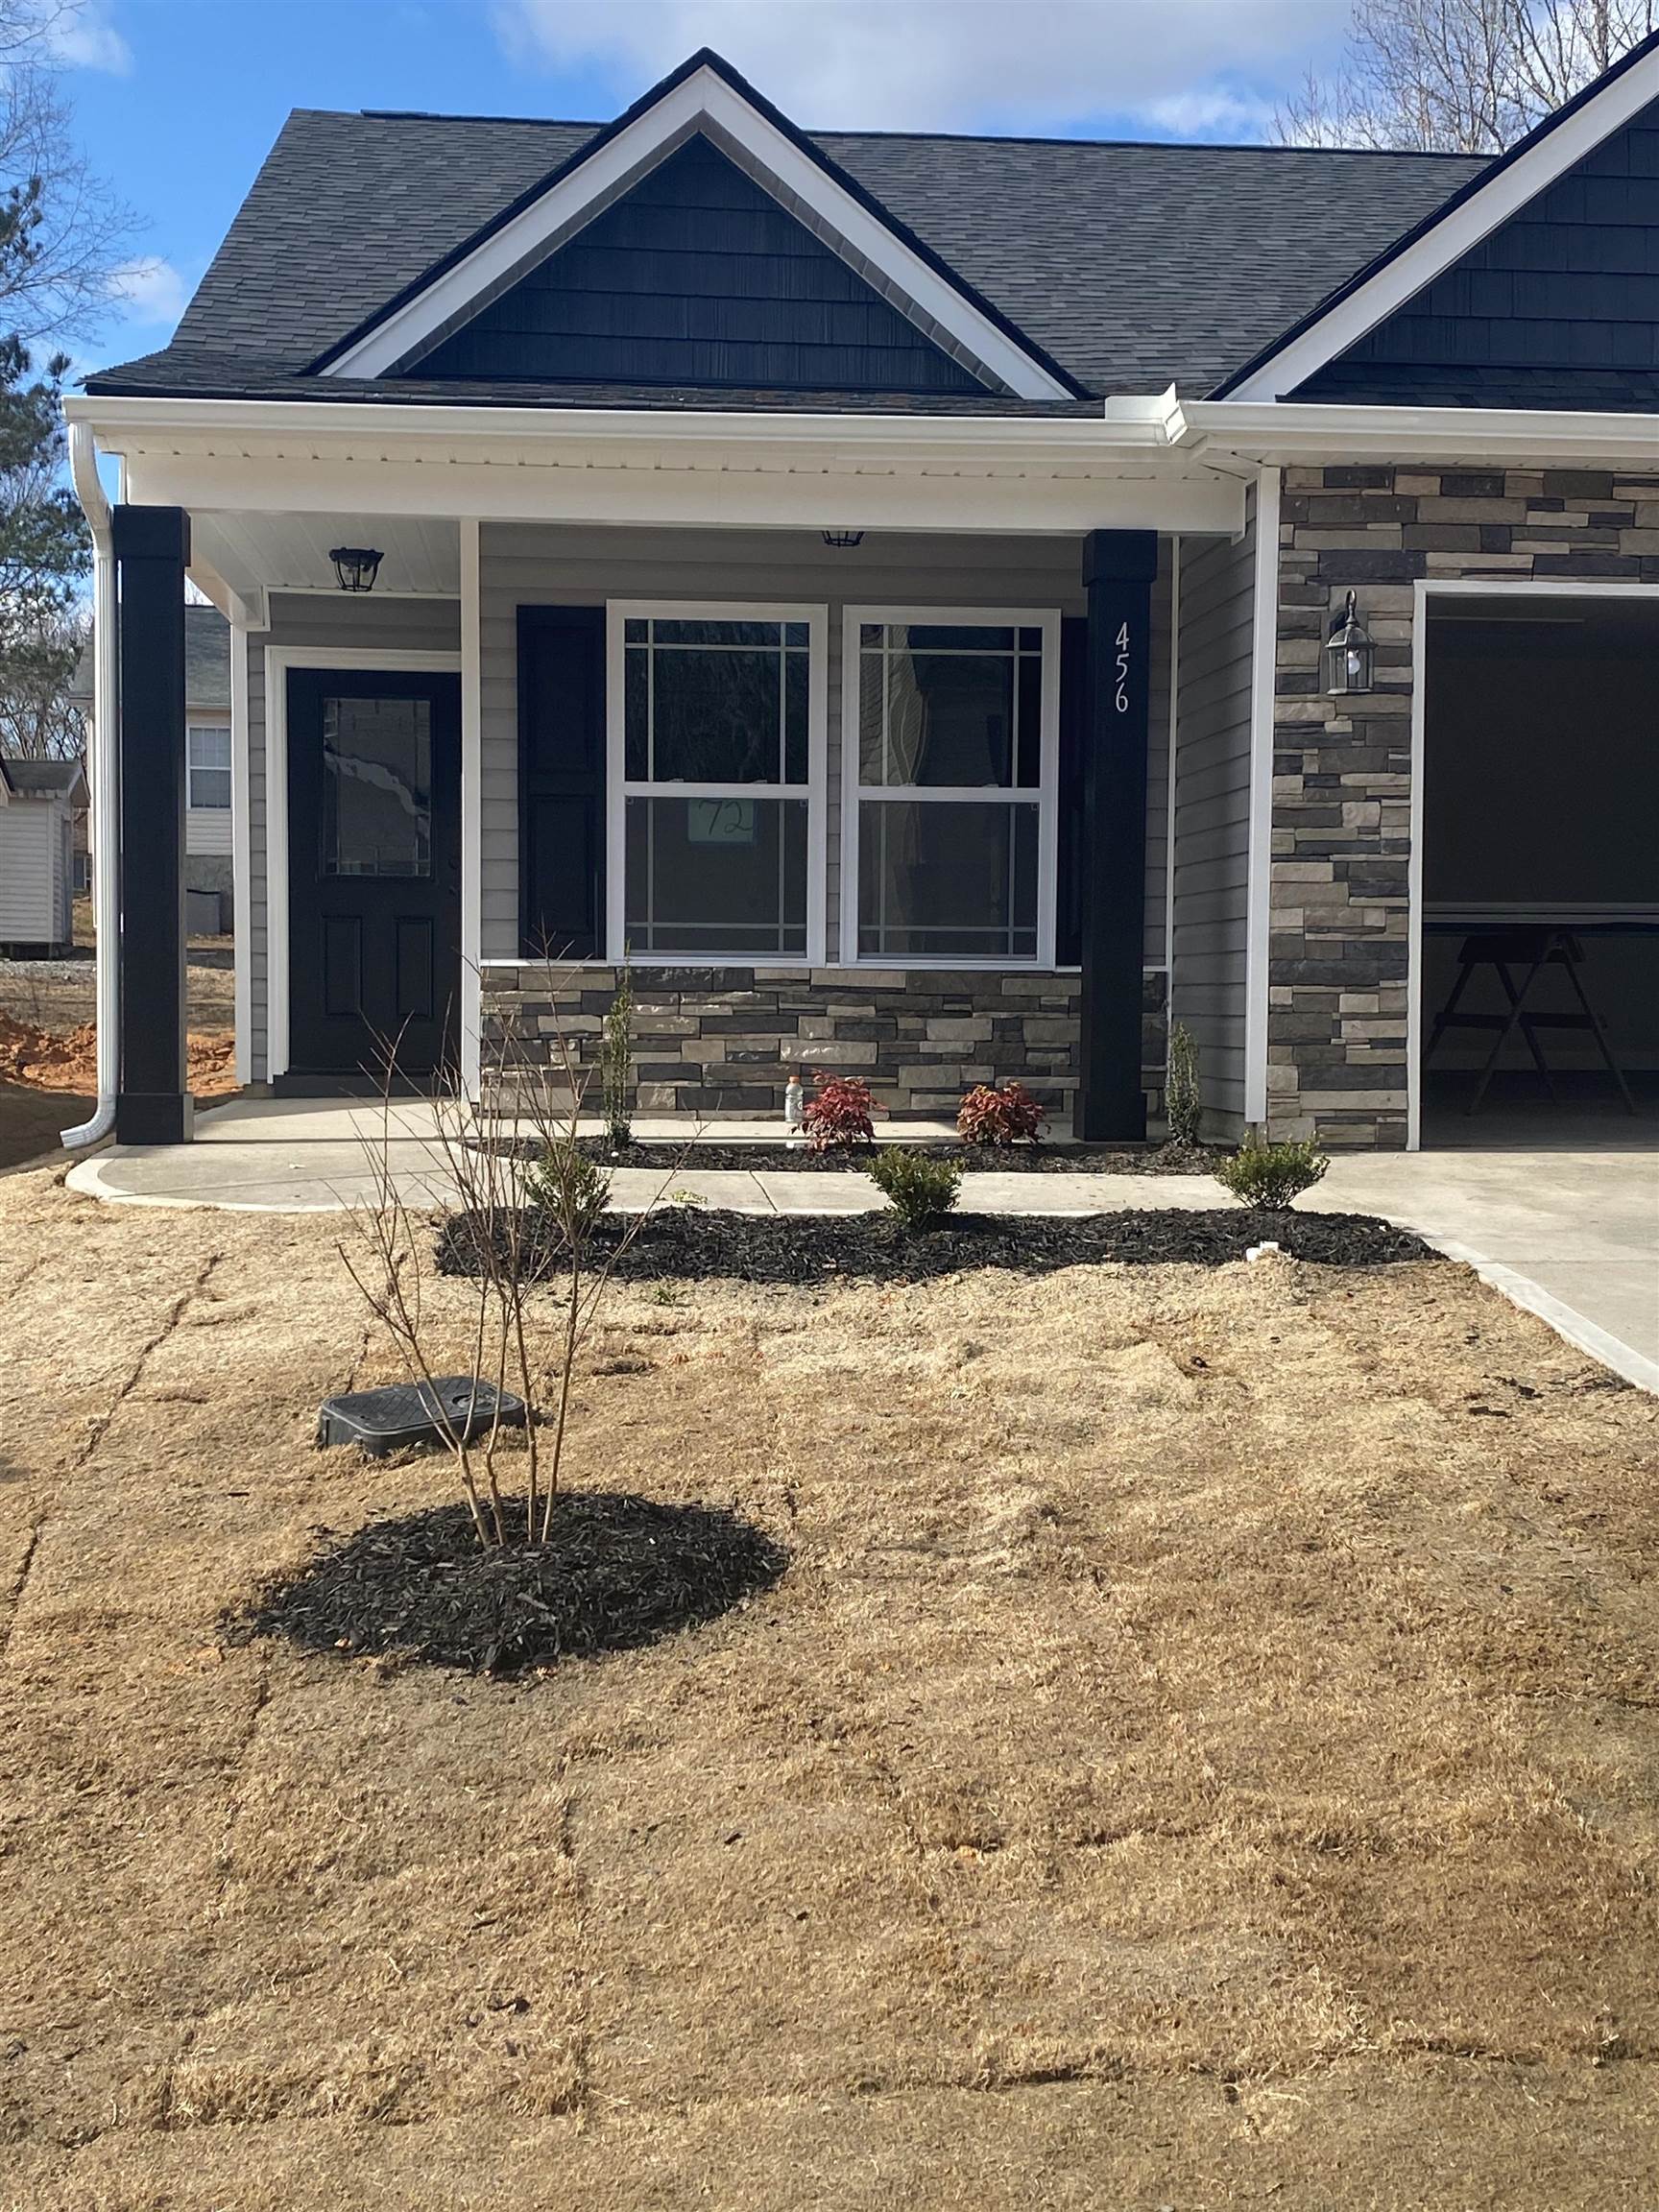 Clifton plan - 1368 SF one level plan - 3 BR/ 2 BA home. Standard features include granite countertops, Marsh cabinets, covered back patio and more. Lot 73